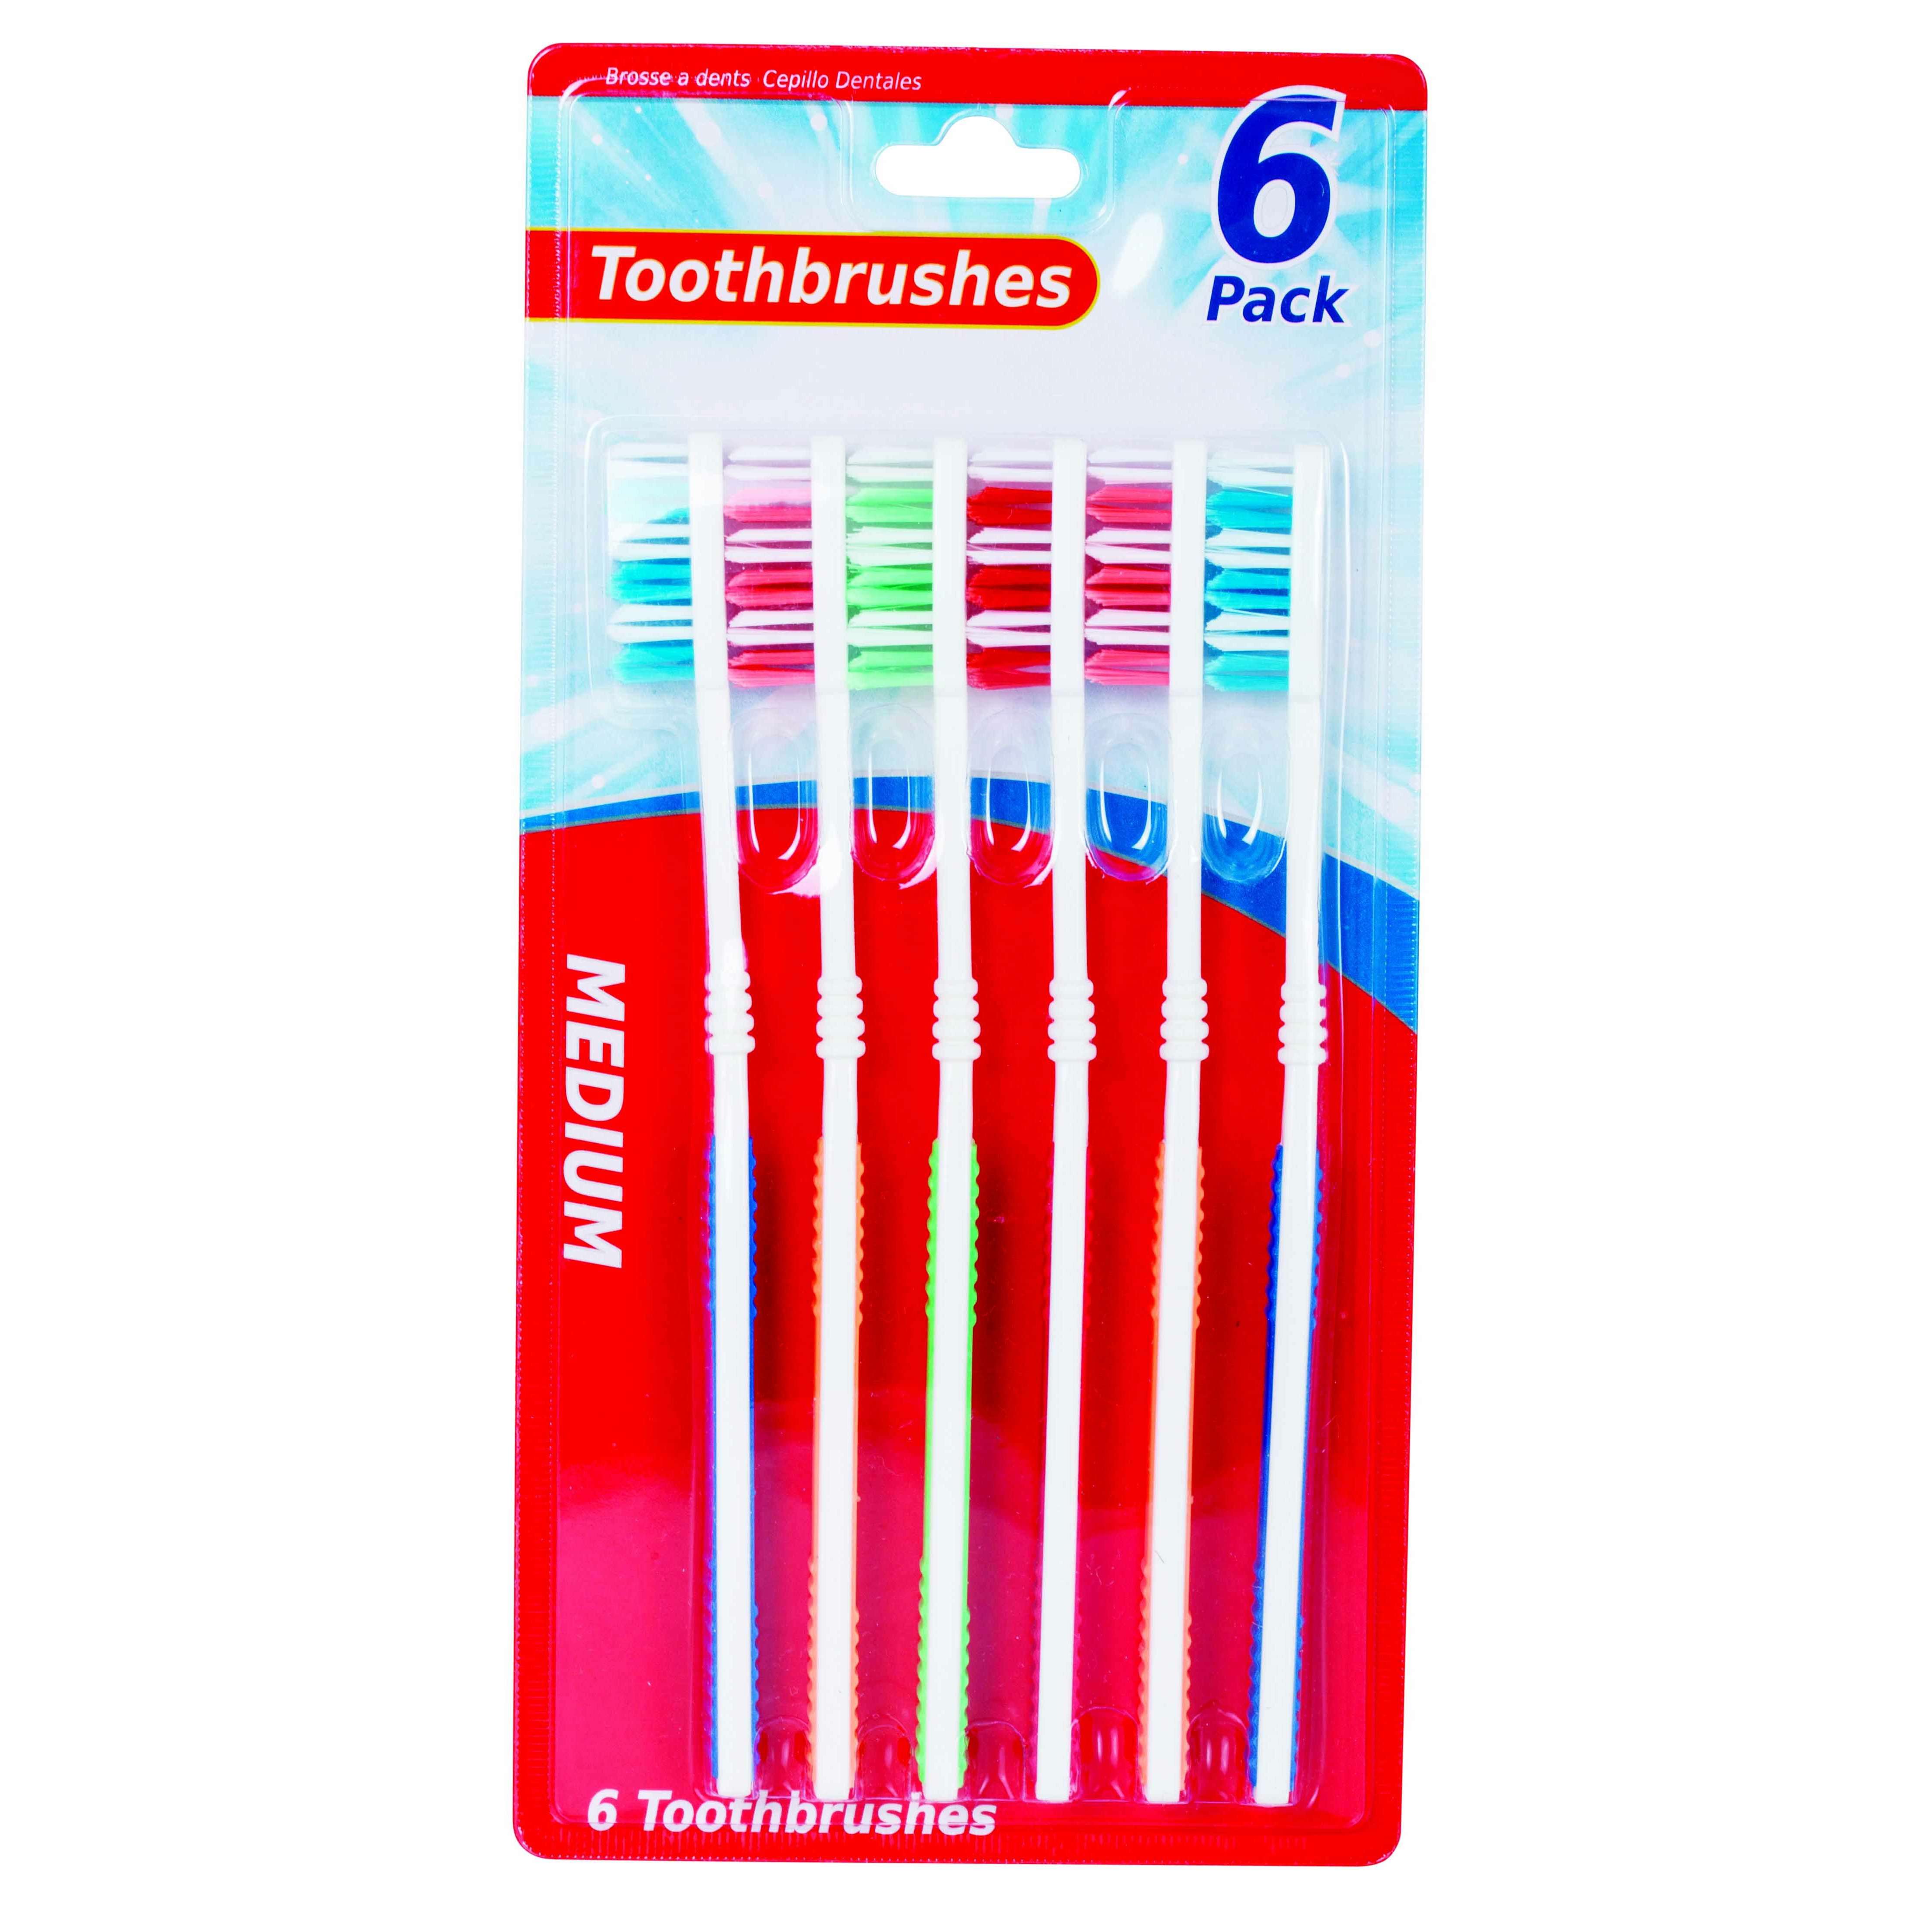 Toothbrushes 6 Pack - Dollars and Sense